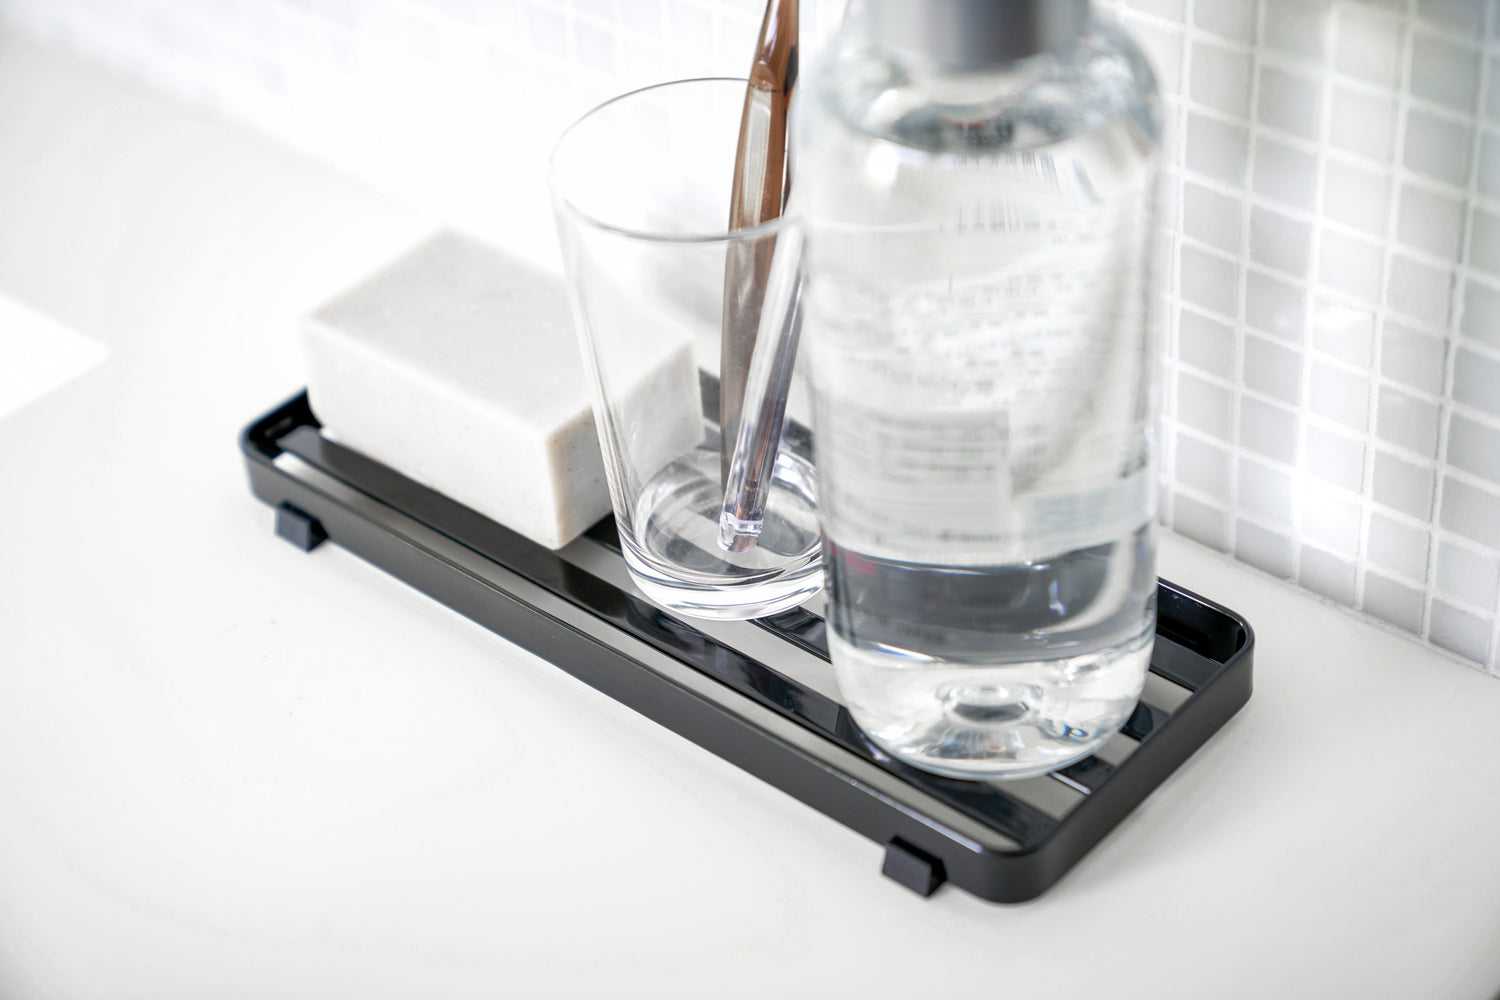 View 10 - Close up aerial view of black Slotted Tray holding soap, toothbrush, and bottle by Yamazaki Home.